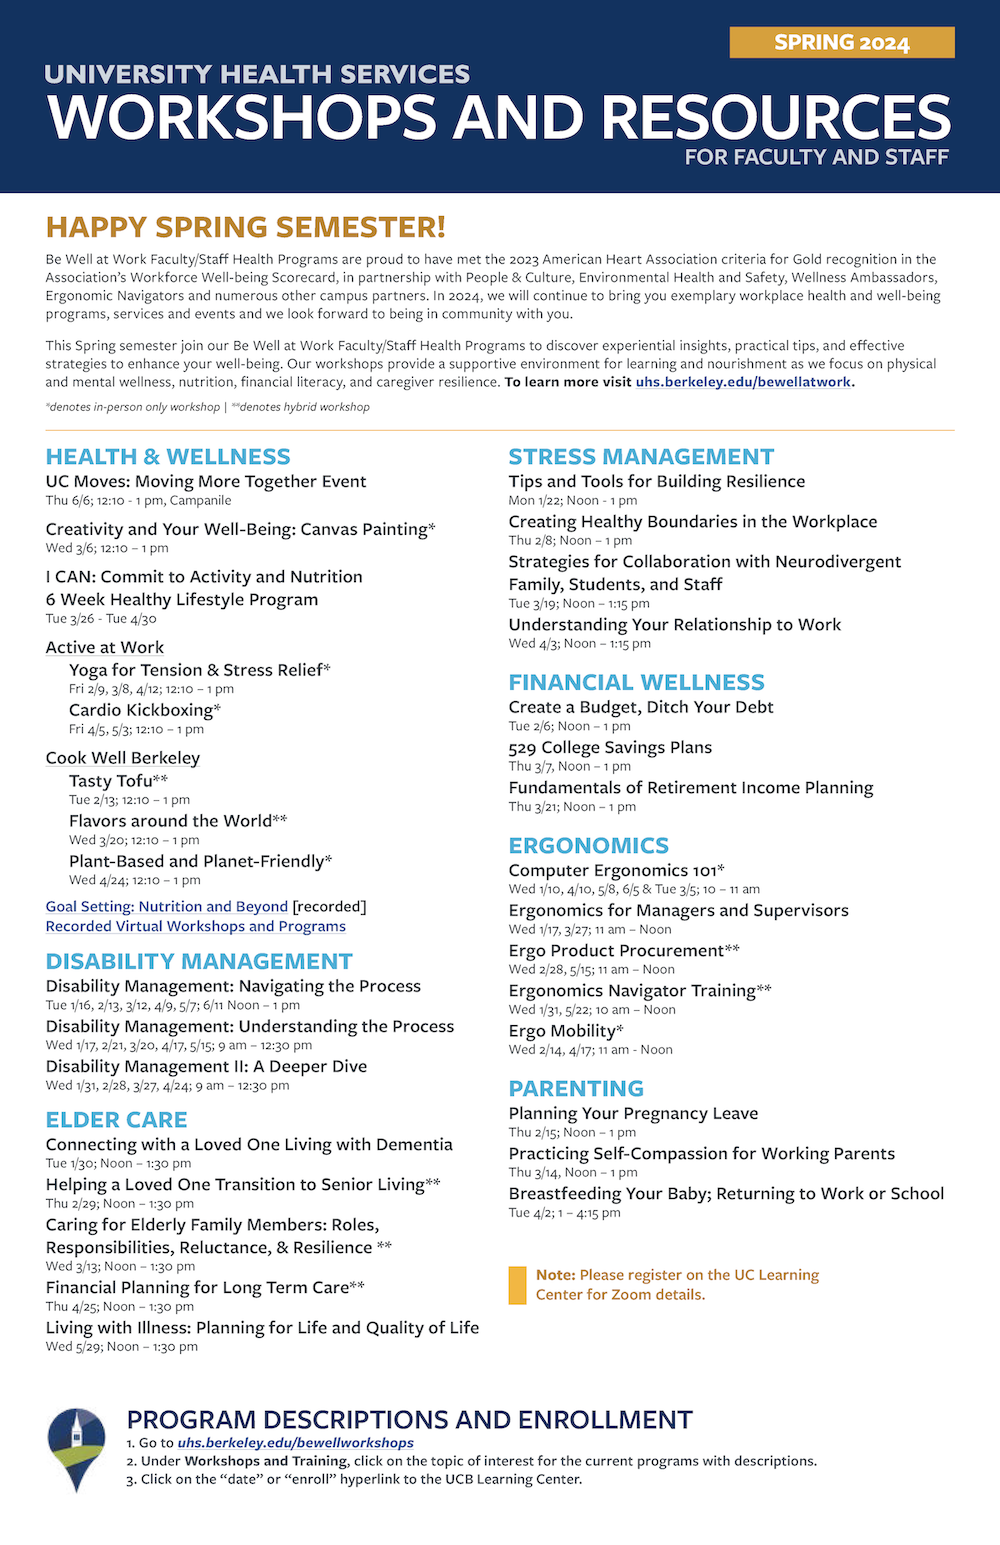 Be Well at Work Flyer with Workshop Descriptions